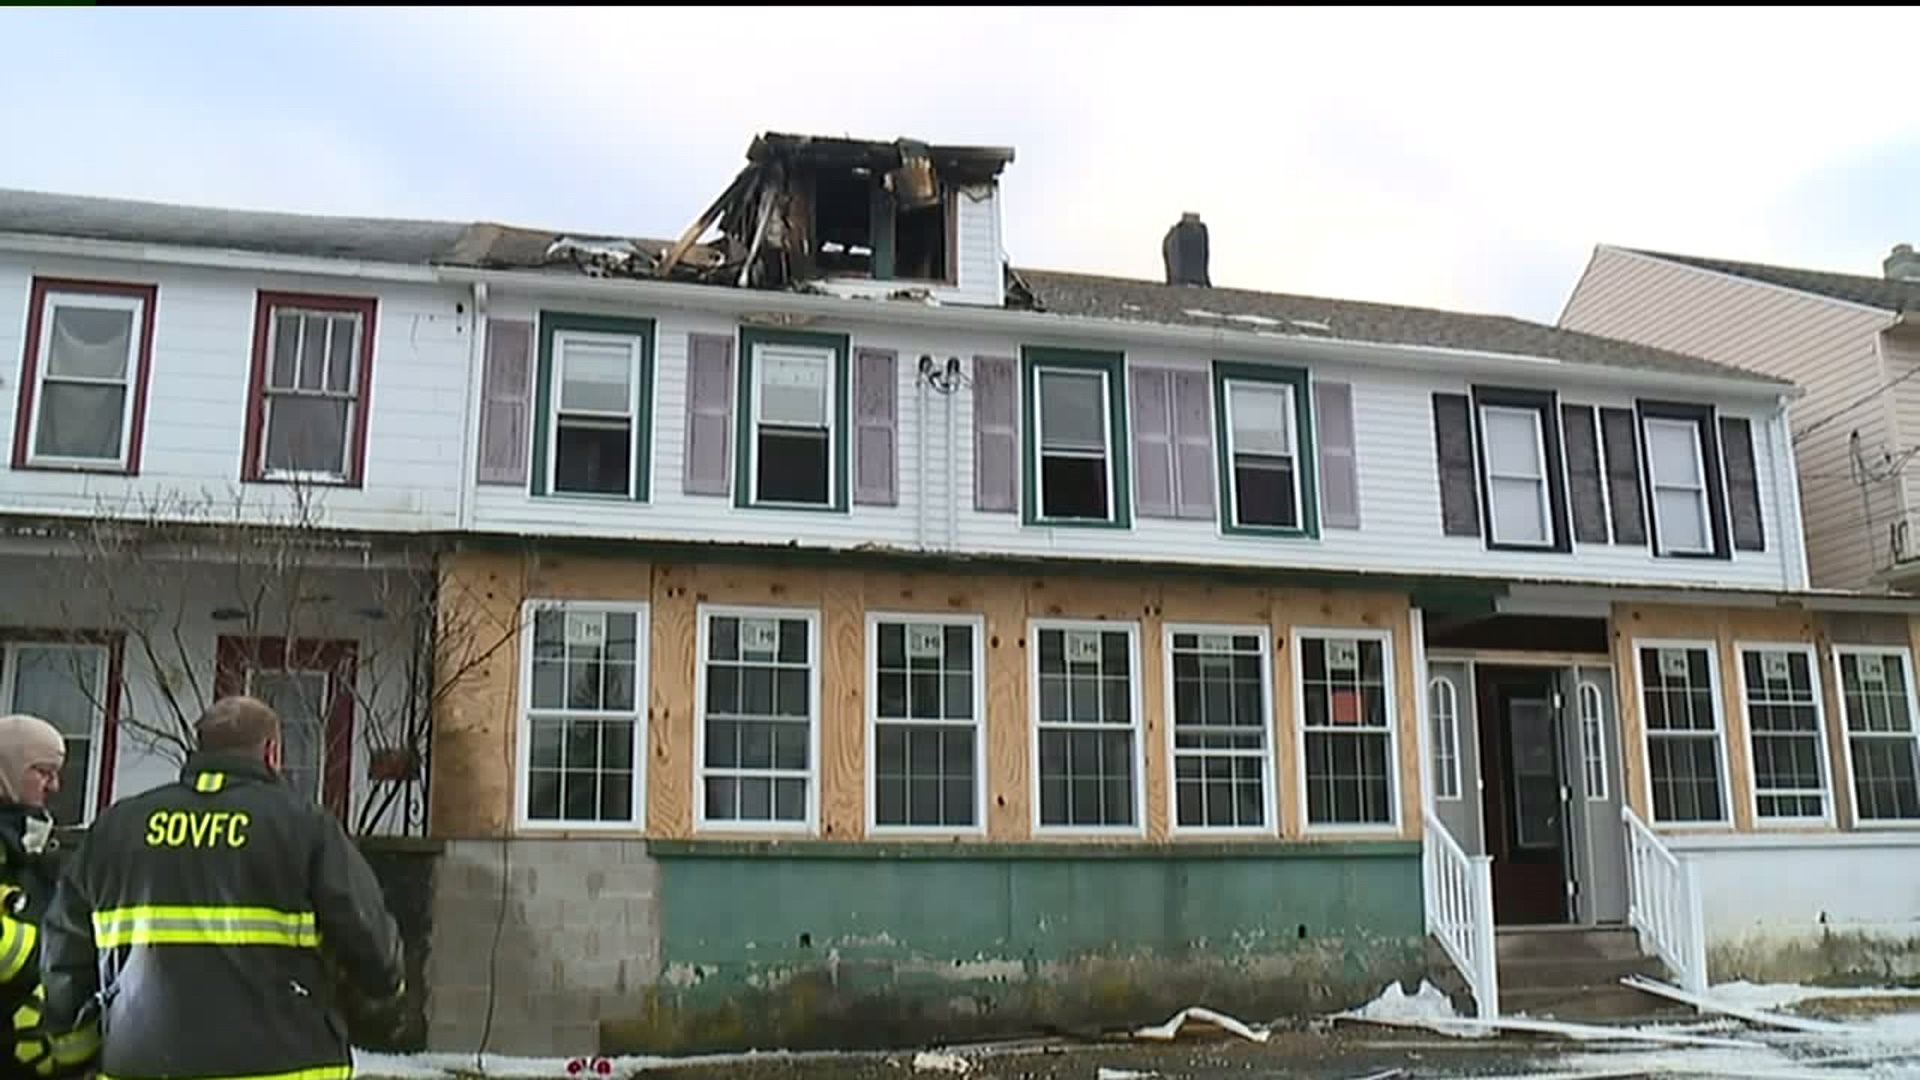 Fire Damages Row Home in Schuylkill County